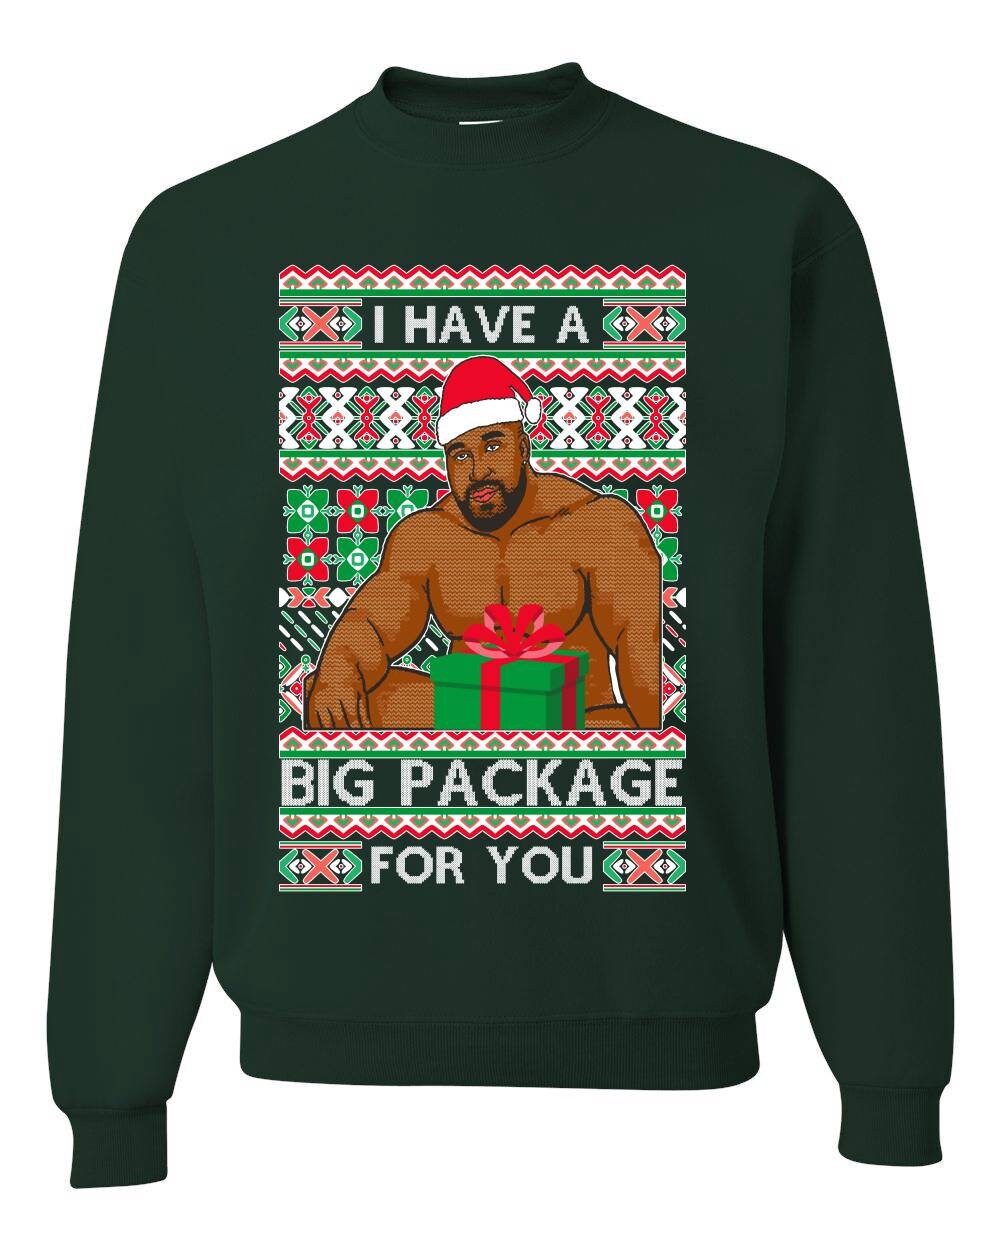 Discover I have a Big Package Christmas Ugly Christmas Sweater